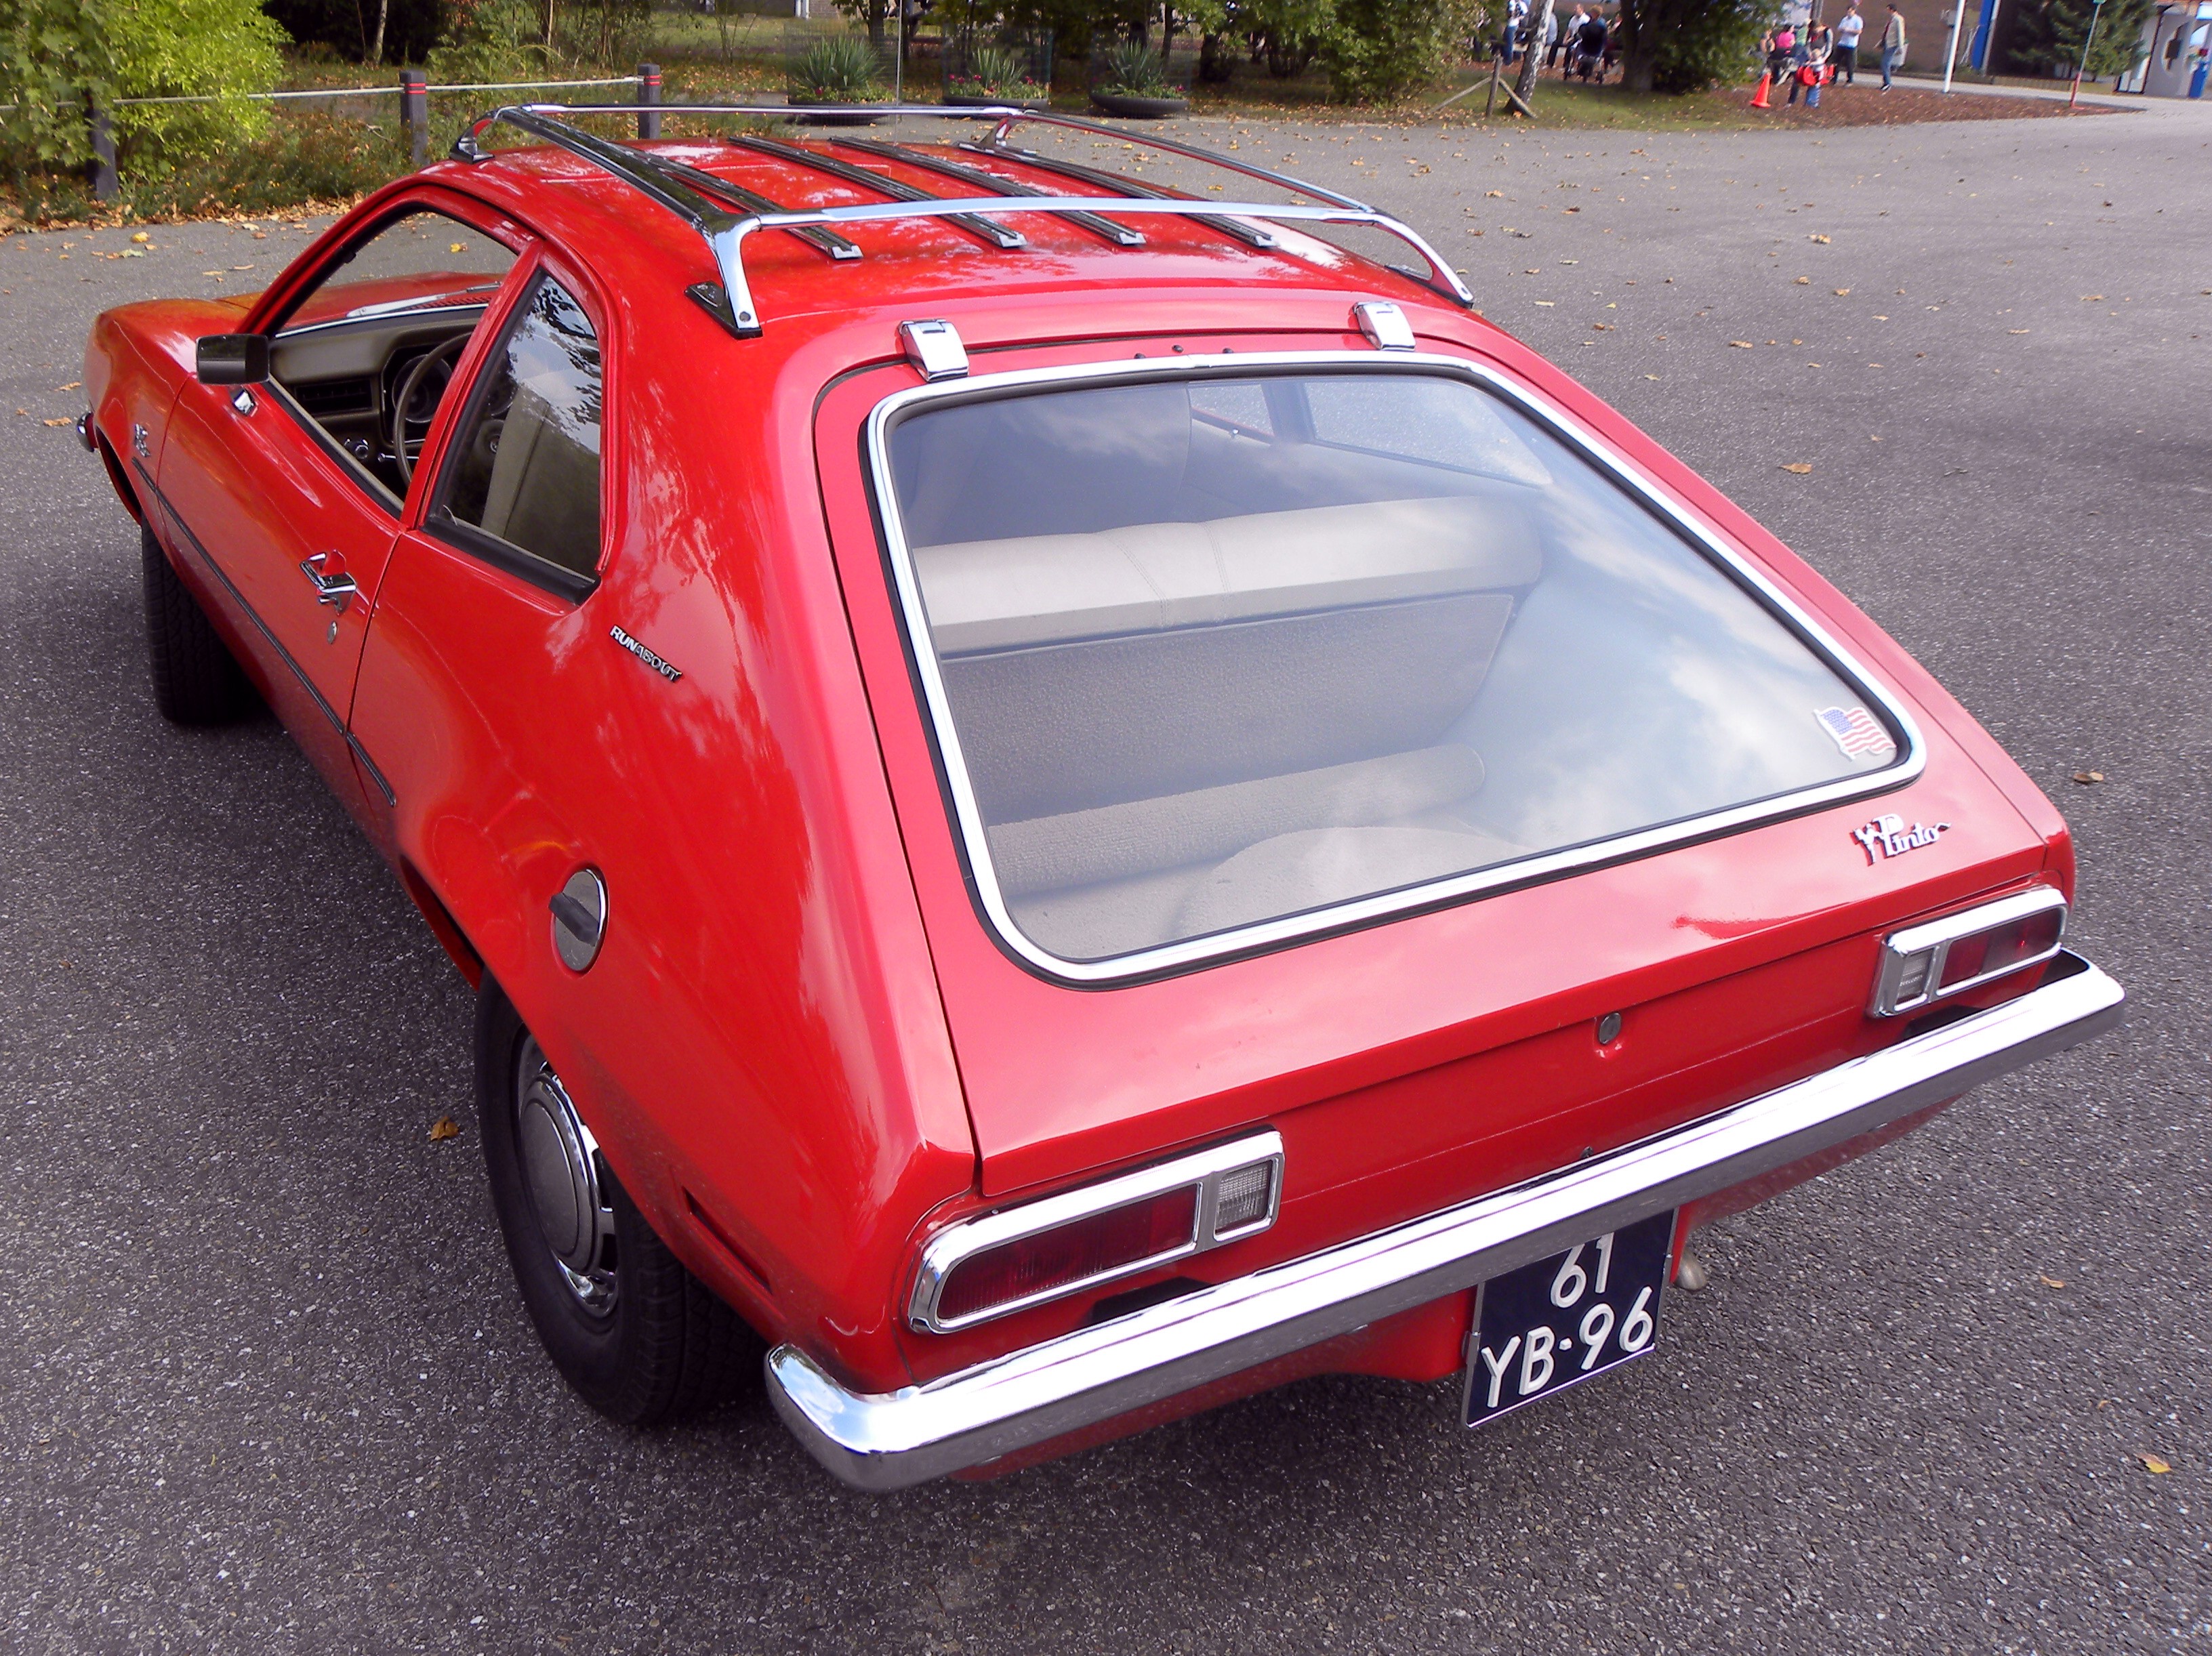 Ford pinto lawsuit wiki #5